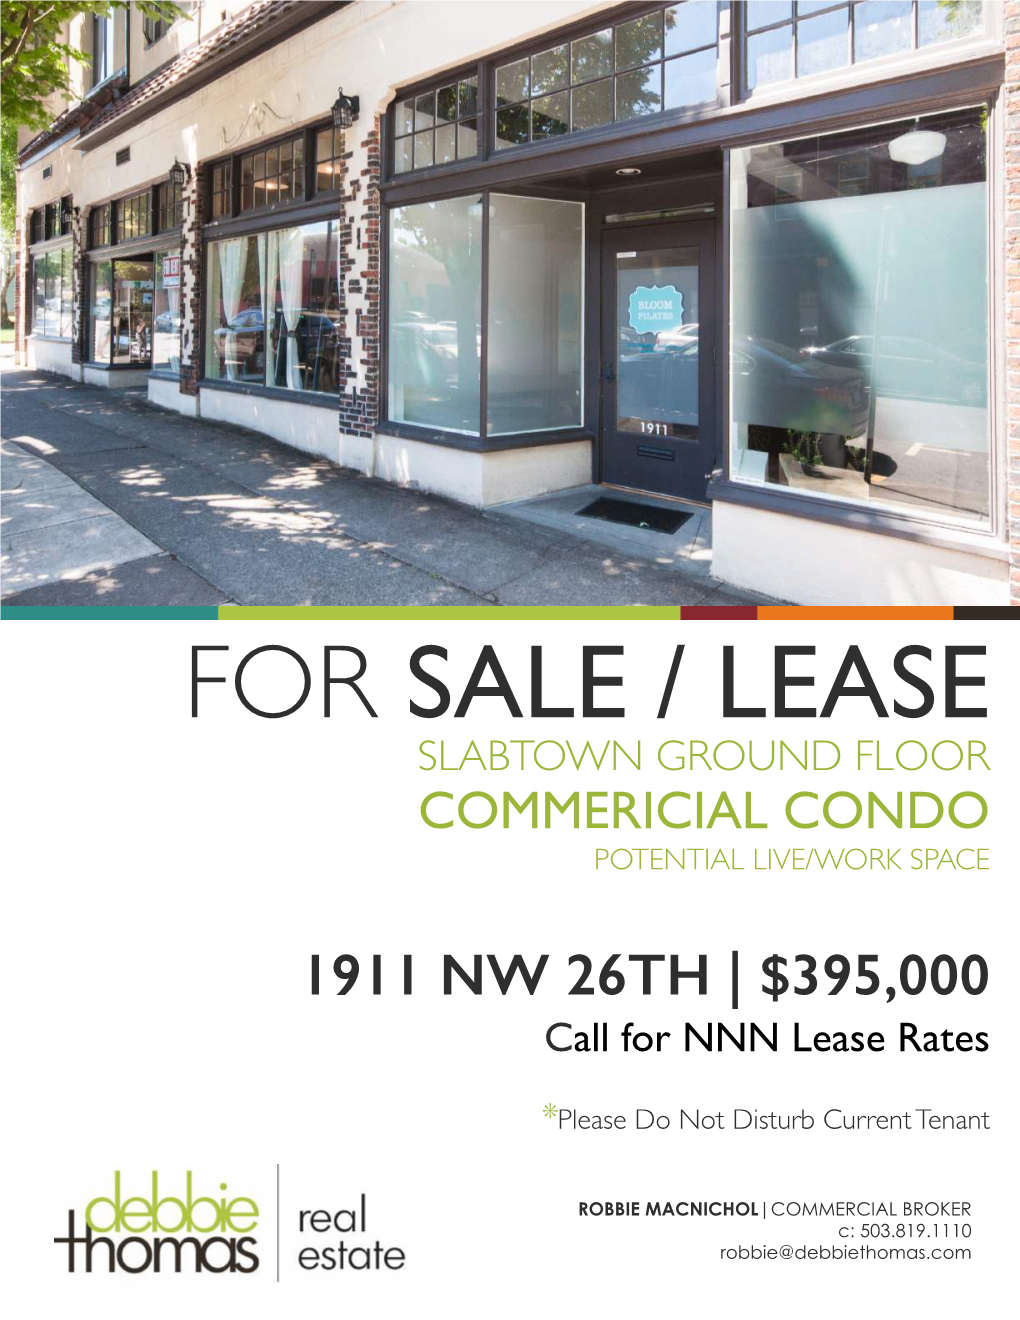 For Sale / Lease Slabtown Ground Floor Commericial Condo Potential Live/Work Space